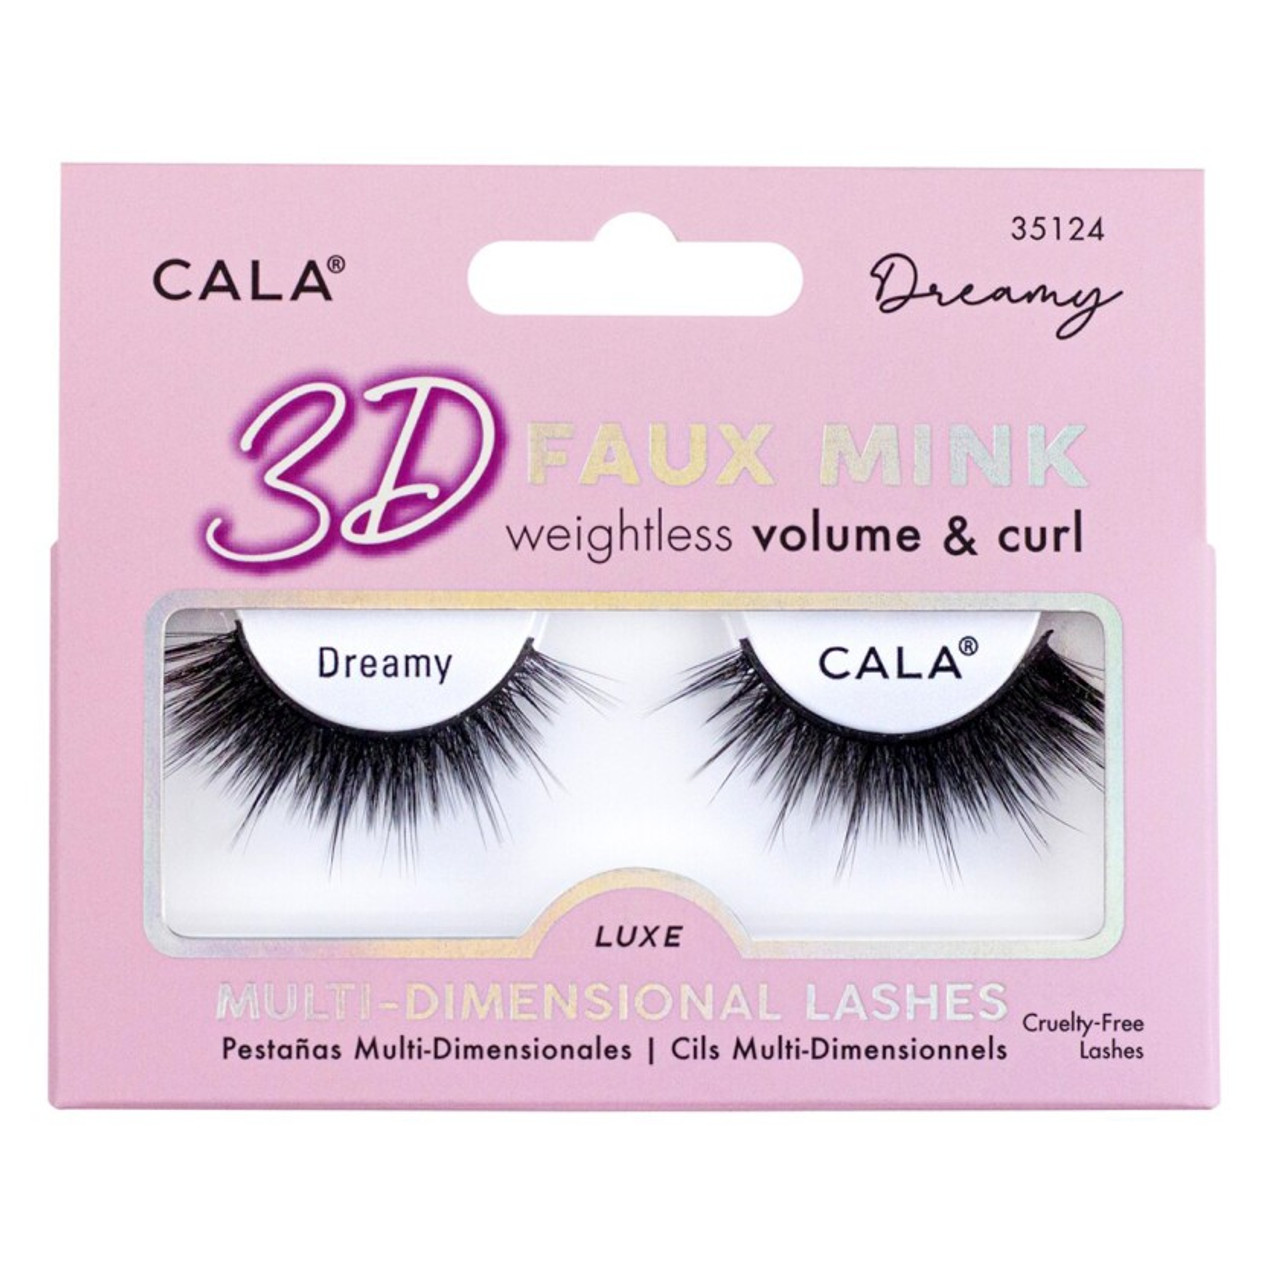 3D FAUX MINK LASHES: DREAMY - CALA PRODUCTS